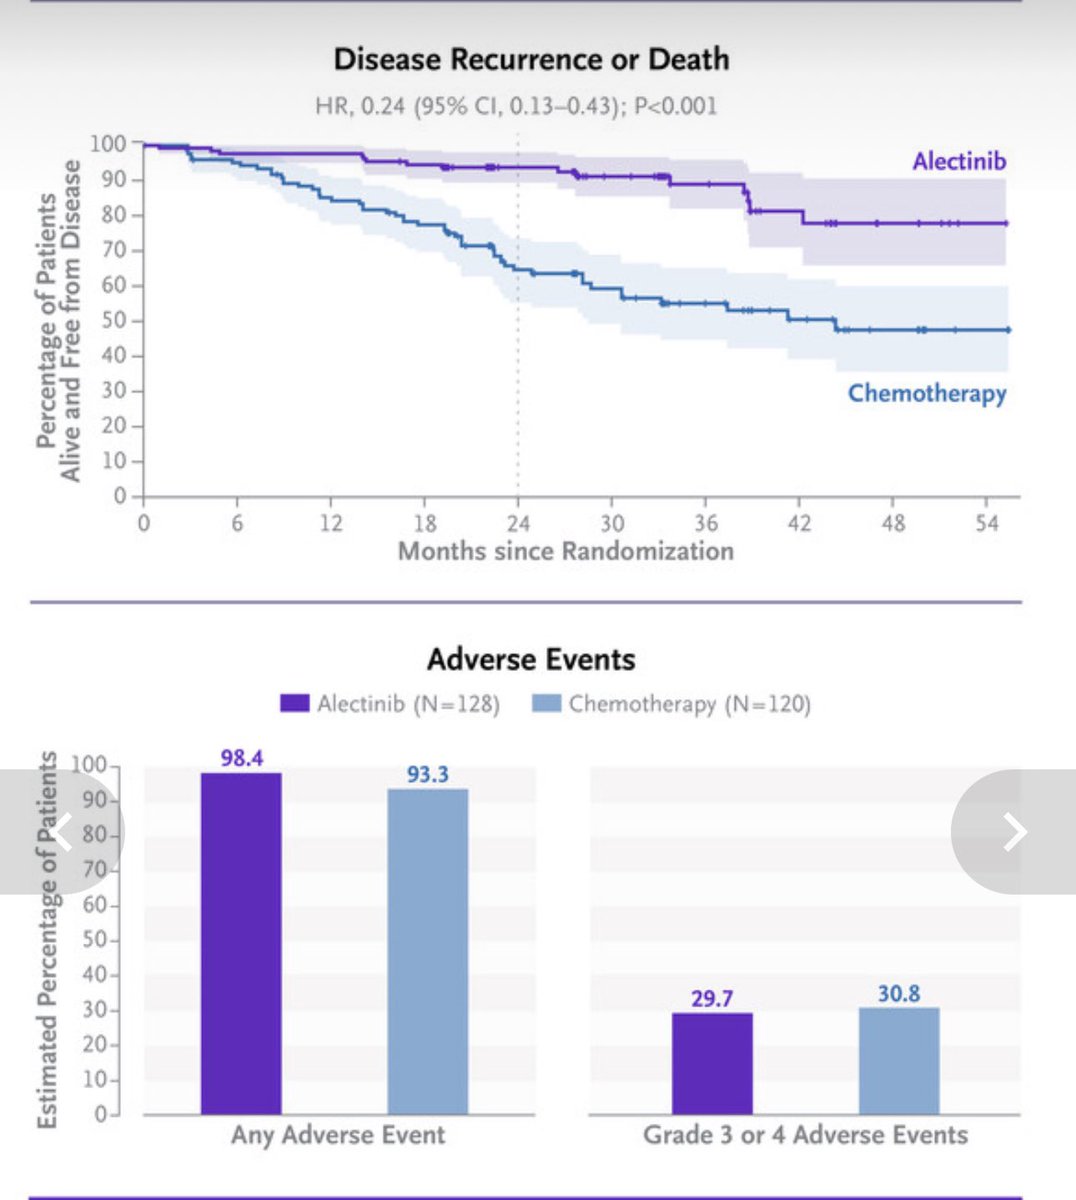 🫁ALINA: Adjuvant alectinib significantly improves 2-year disease-free survival in resected ALK-positive NSCLC patients (stage IB, II, IIIA) vs. platinum-based chemo: 93.8% vs 63.0% (stage II/IIIA) & 93.6% vs 63.7% (ITT). 🫁Highlights potential shift in post-surgery treatment…